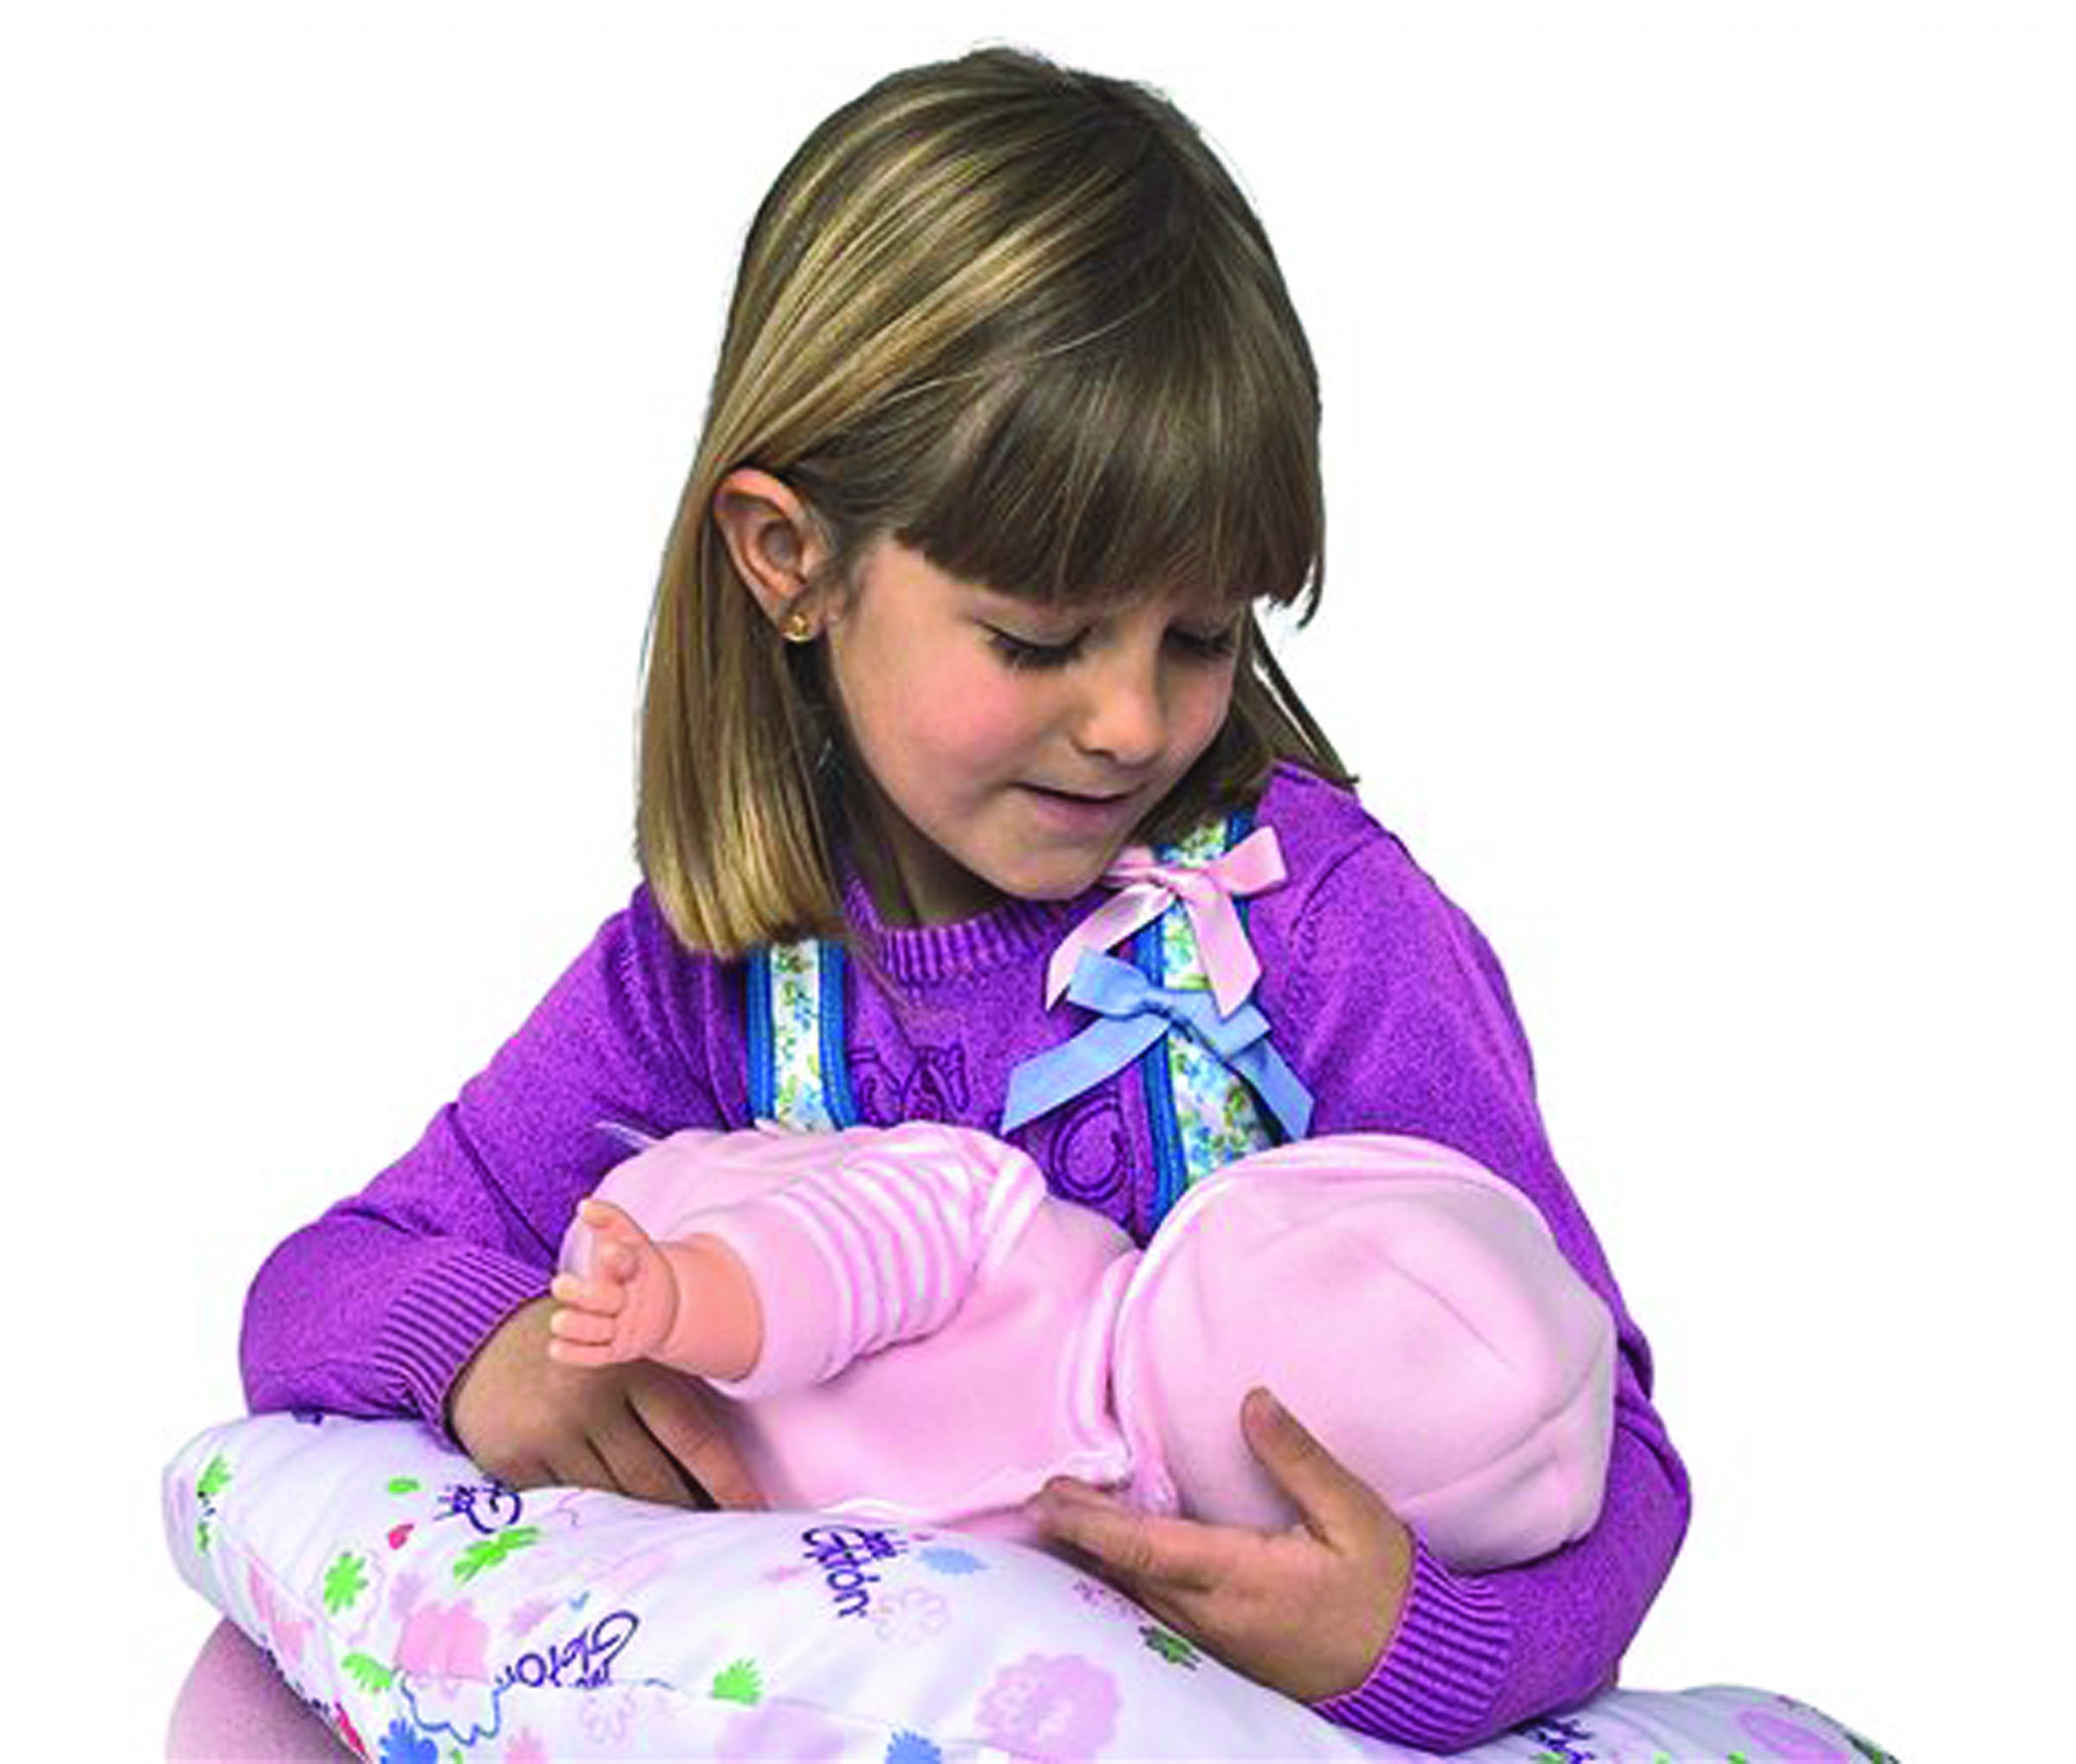 This product image released by Berjuan Toys shows a girl playing with The Breast Milk Baby doll. The breastfeeding doll